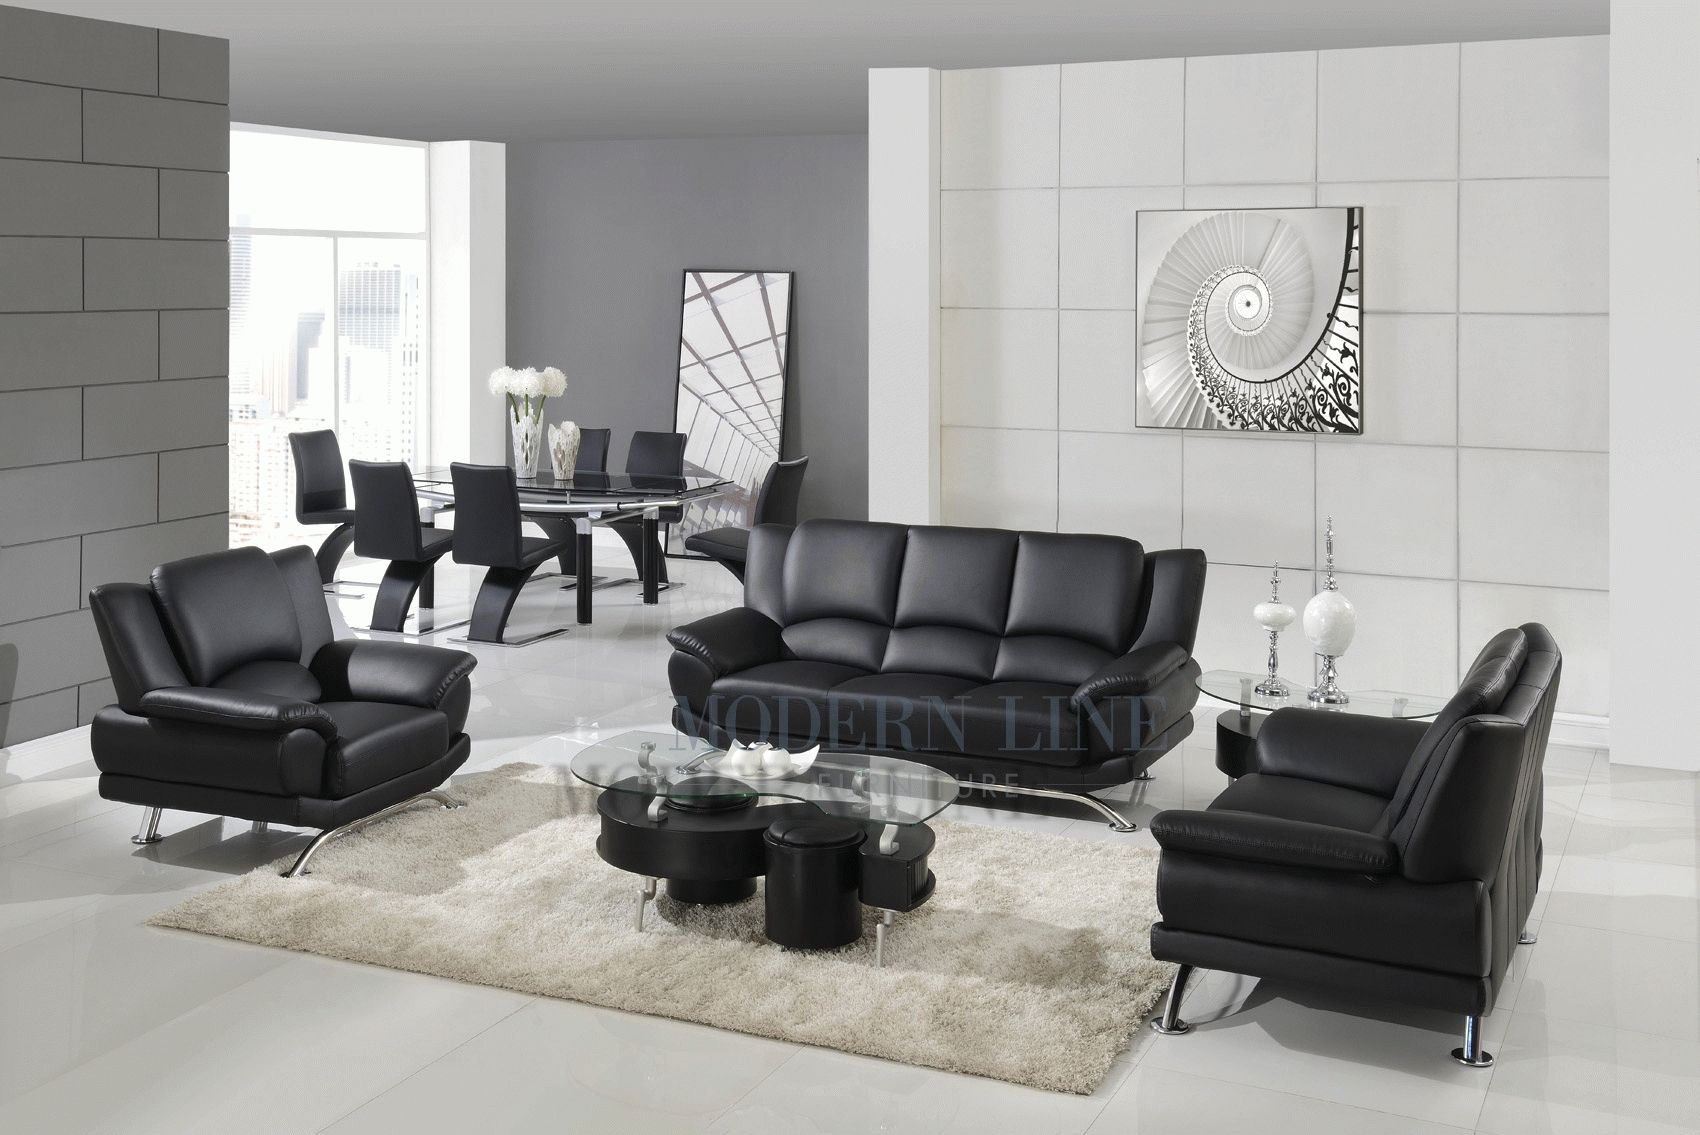 Black Leather Sofa And Loveseat Set With Design Photo 25804 Intended For Black Leather Sofas And Loveseats (View 7 of 20)